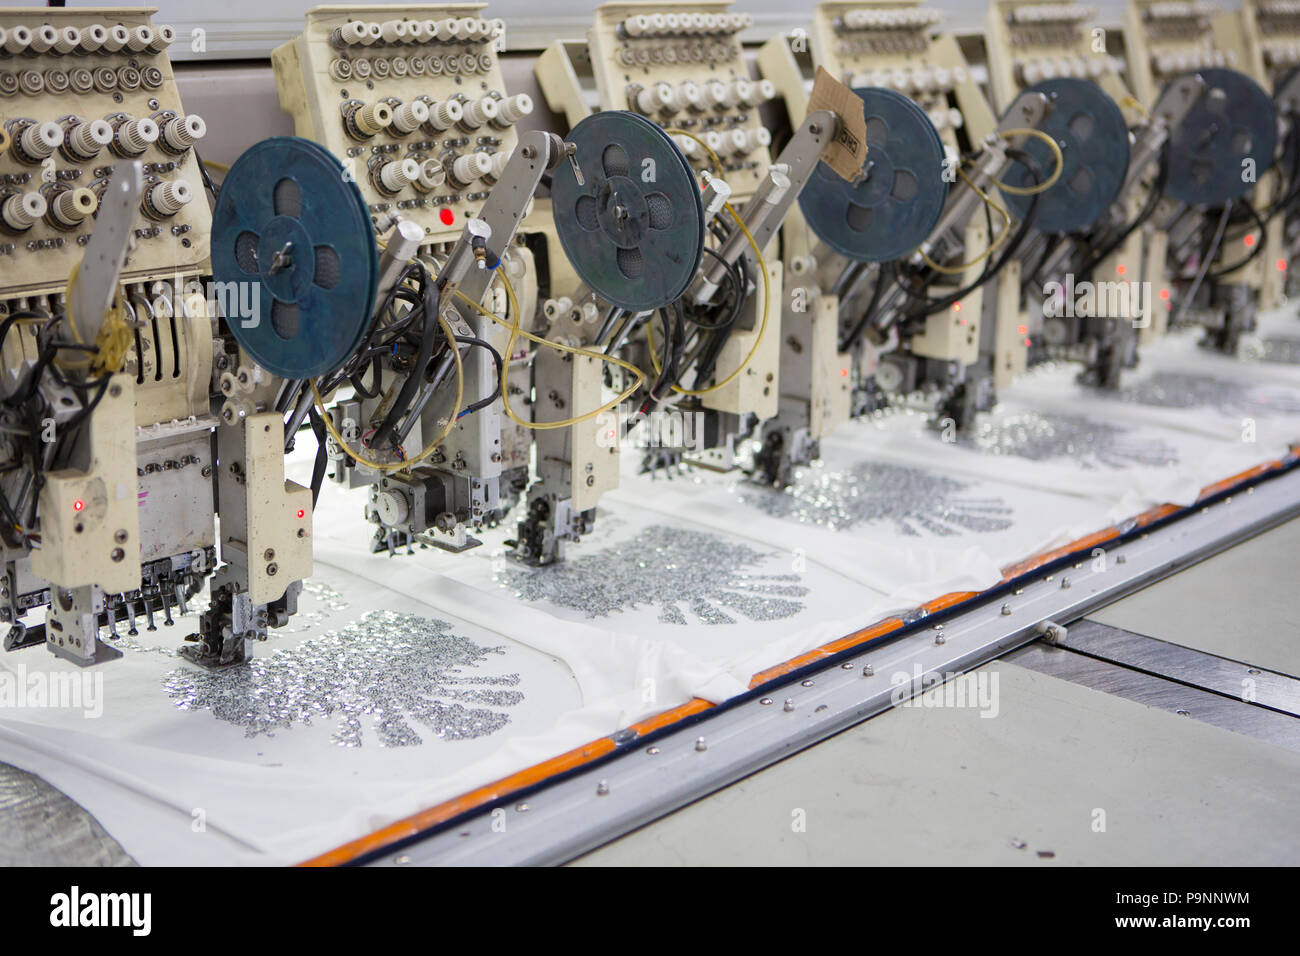 Sewing machines, print a sequin design on a bio cotton T-shirt at a factory, where organic cotton is being used to make clothes, Indore, India. Stock Photo